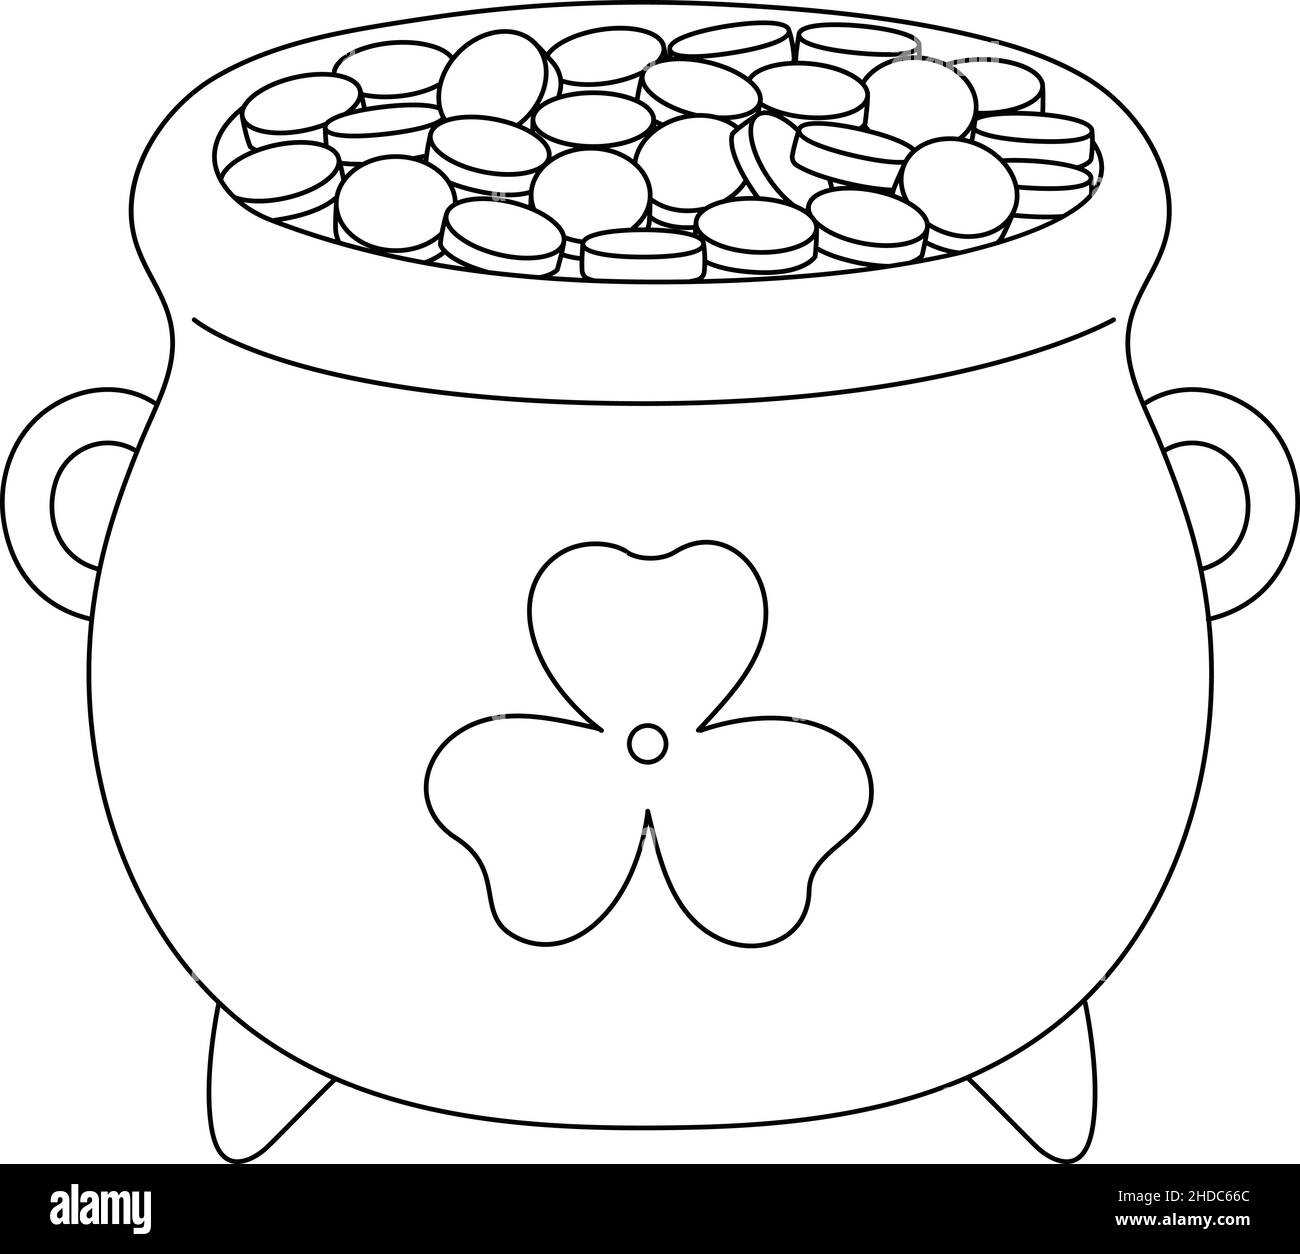 St patricks day pot gold coloring page for kids stock vector image art